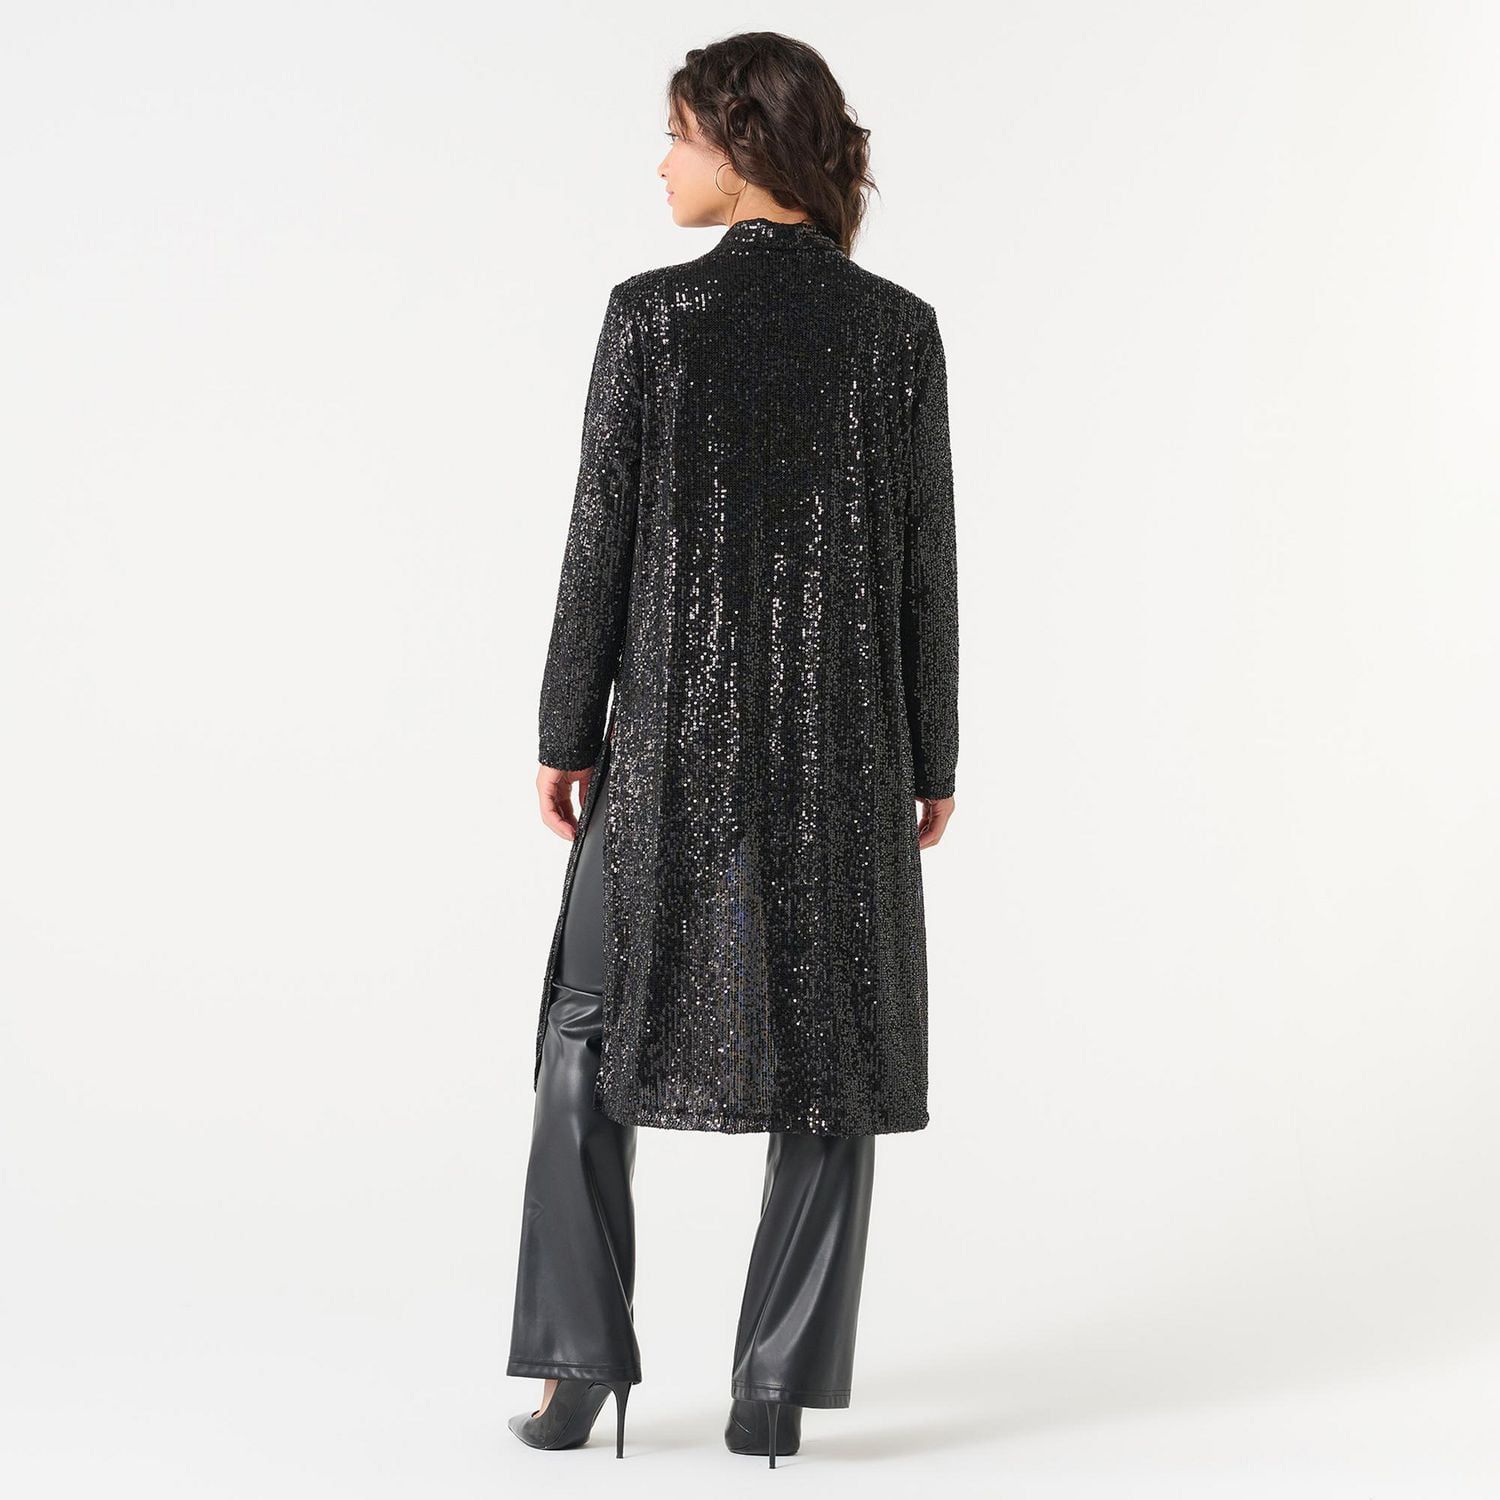 Sequined Duster Jacket  Duster jacket, Unique outfits, Sequin duster